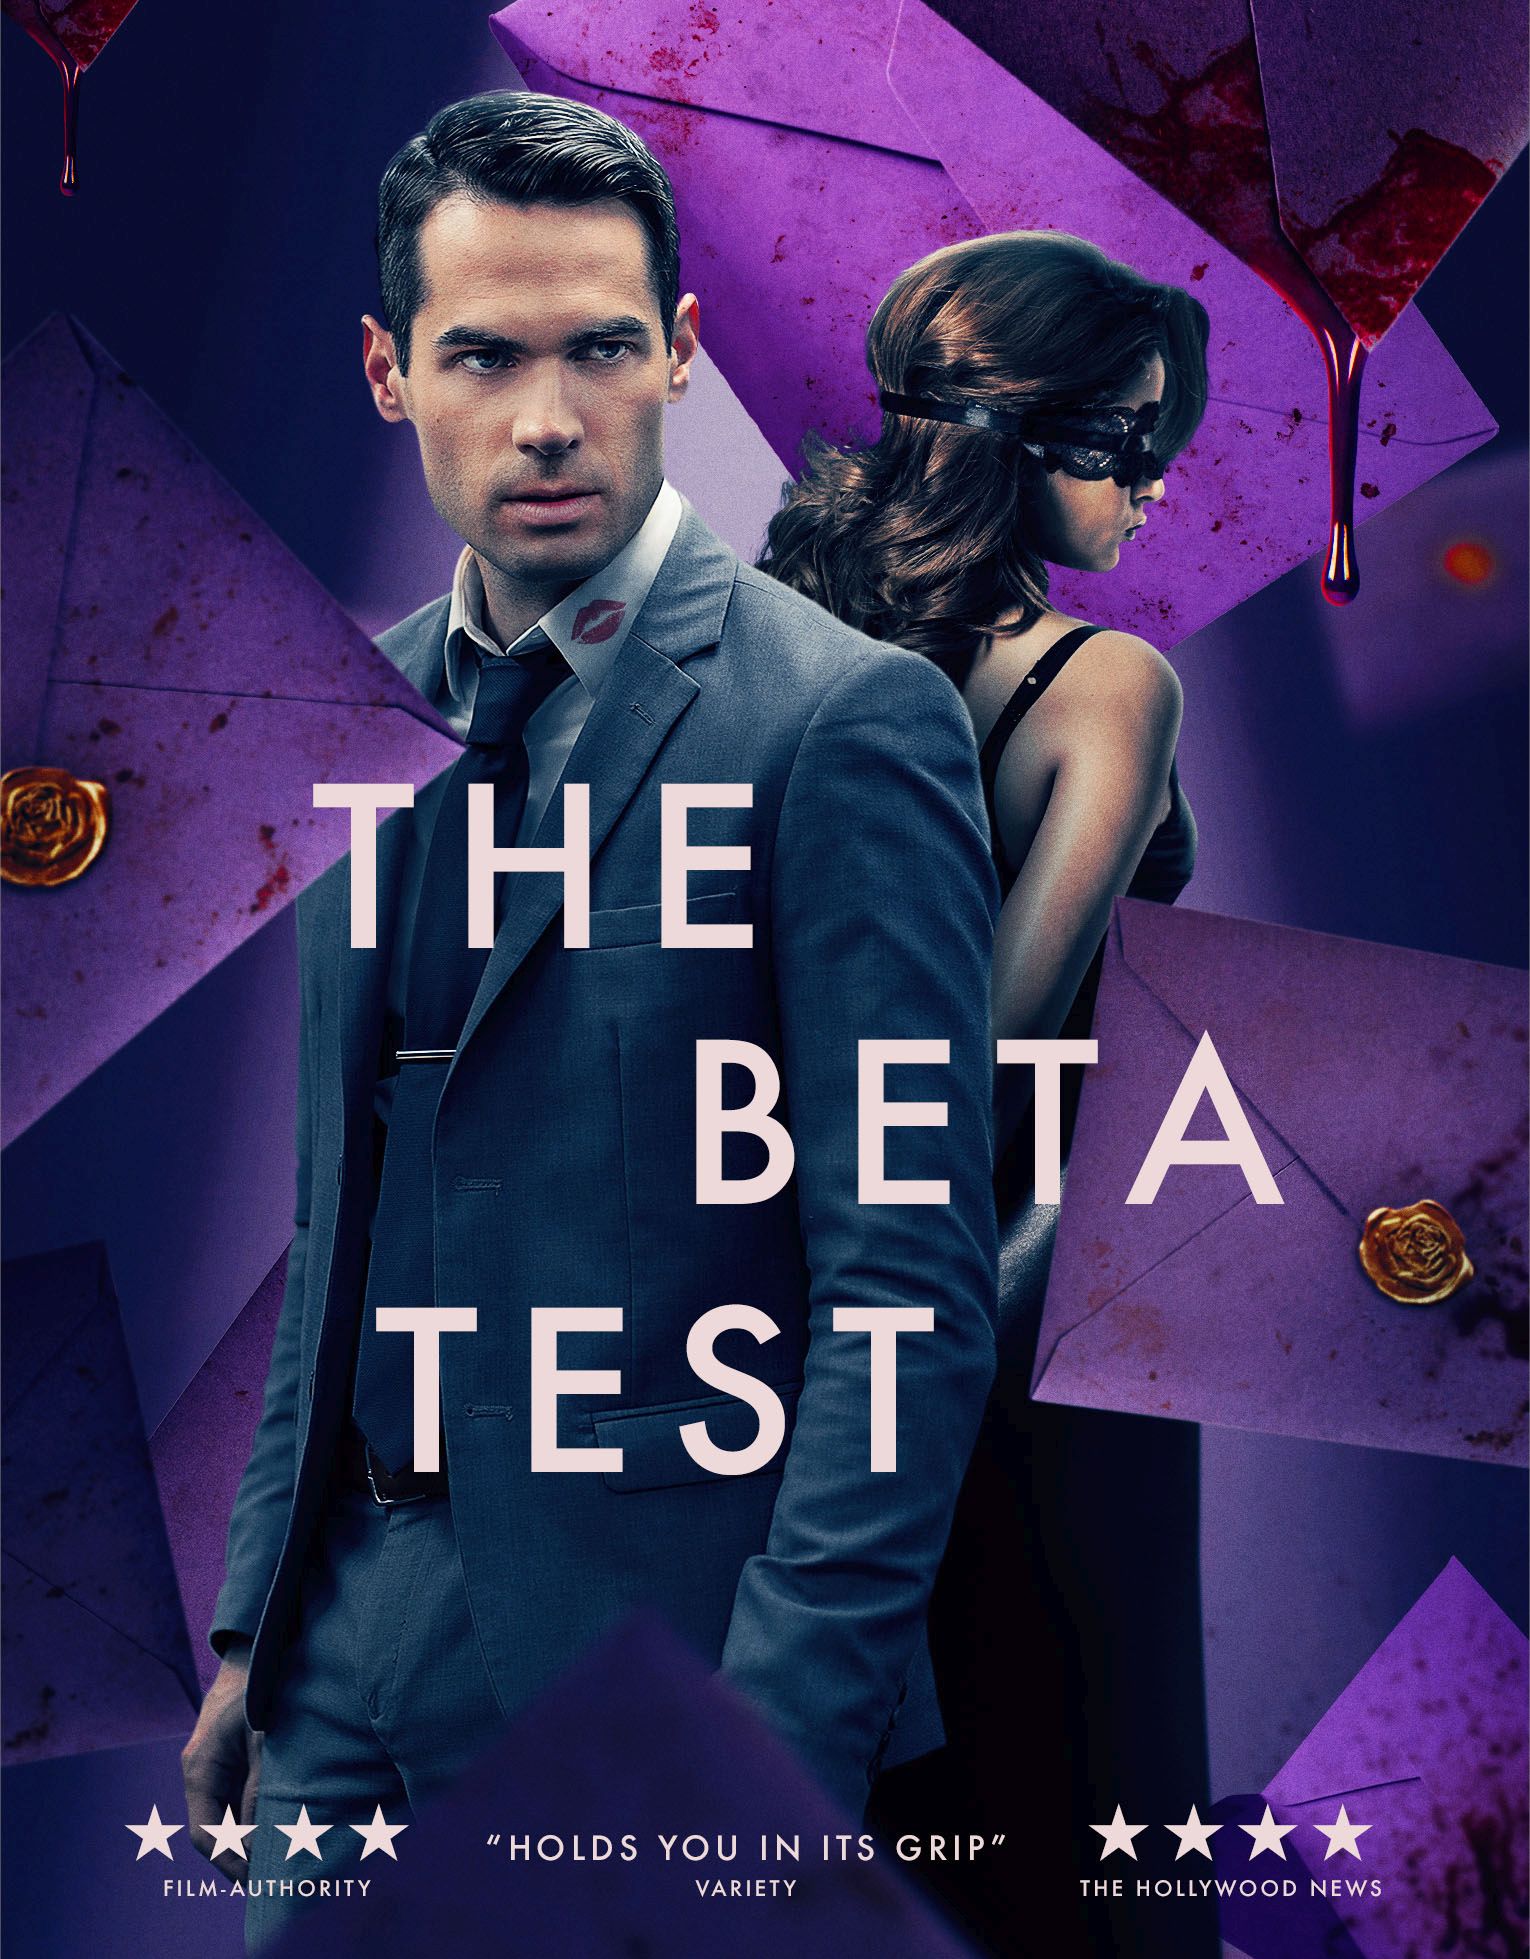 Where to watch The Beta Test